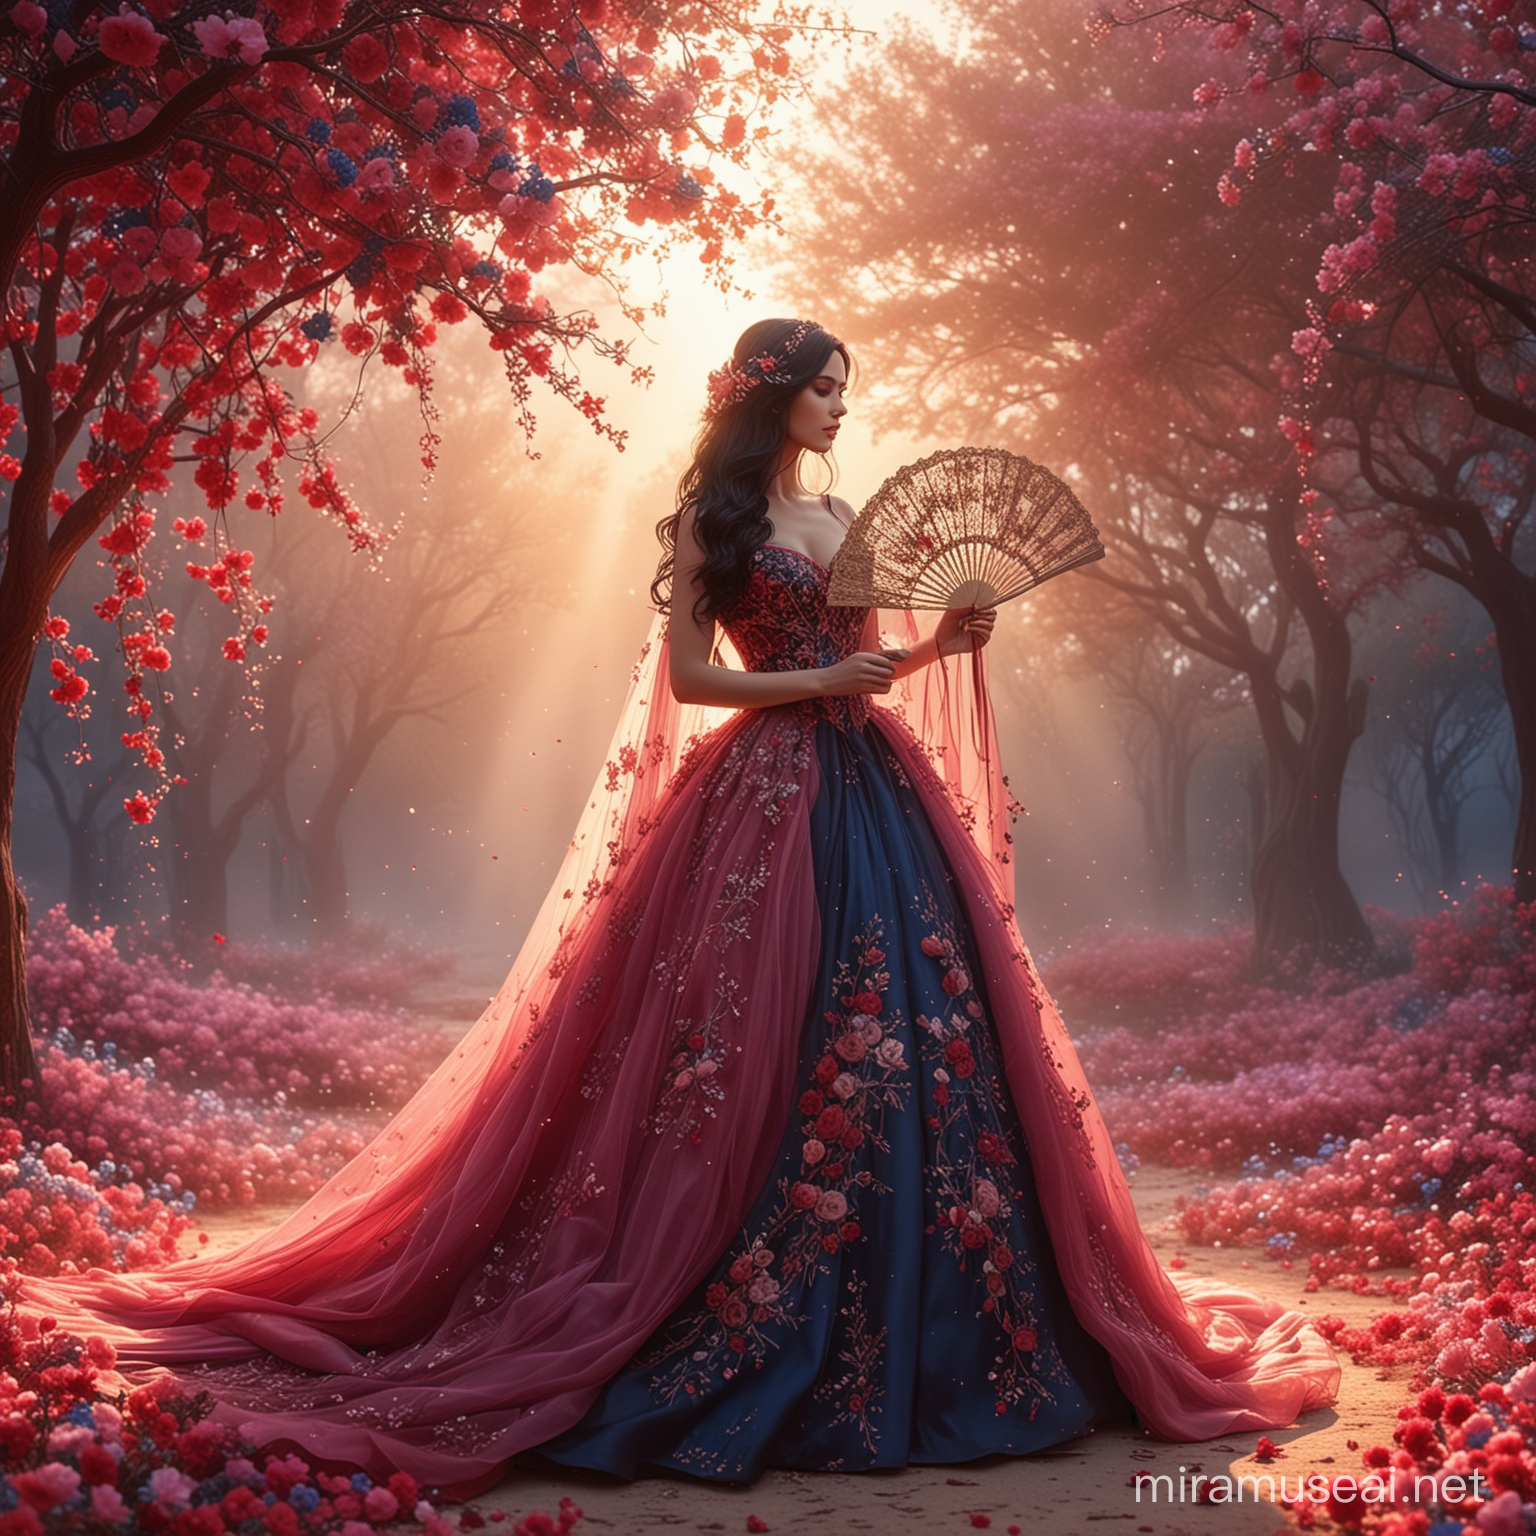 Elegant Woman in Red Wedding Dress Under Floral Tree with Fan